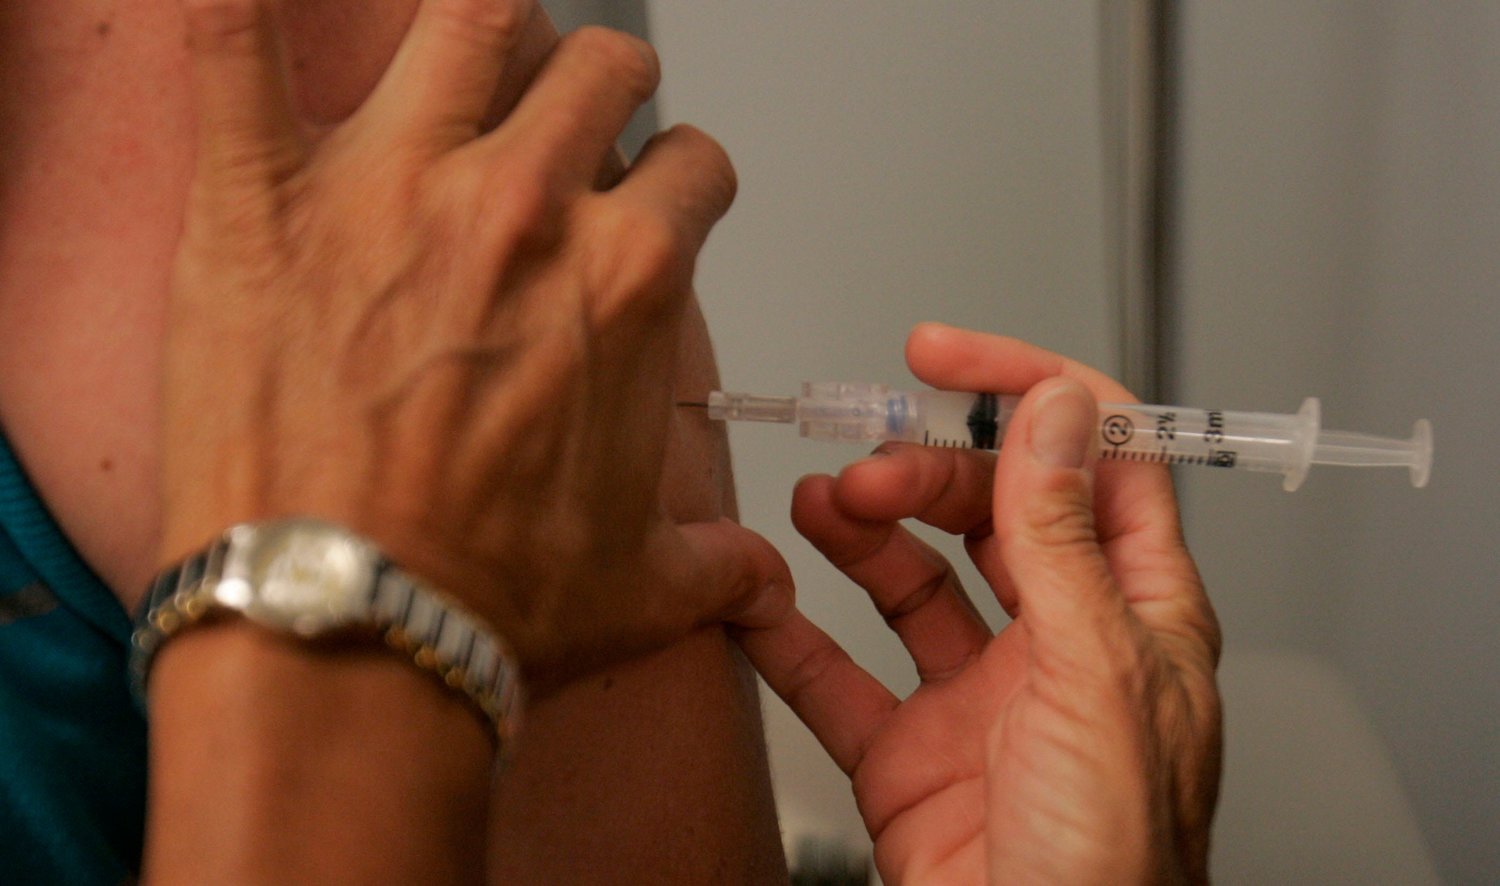 Health experts are strongly encouraging residents to get flu shots this year.